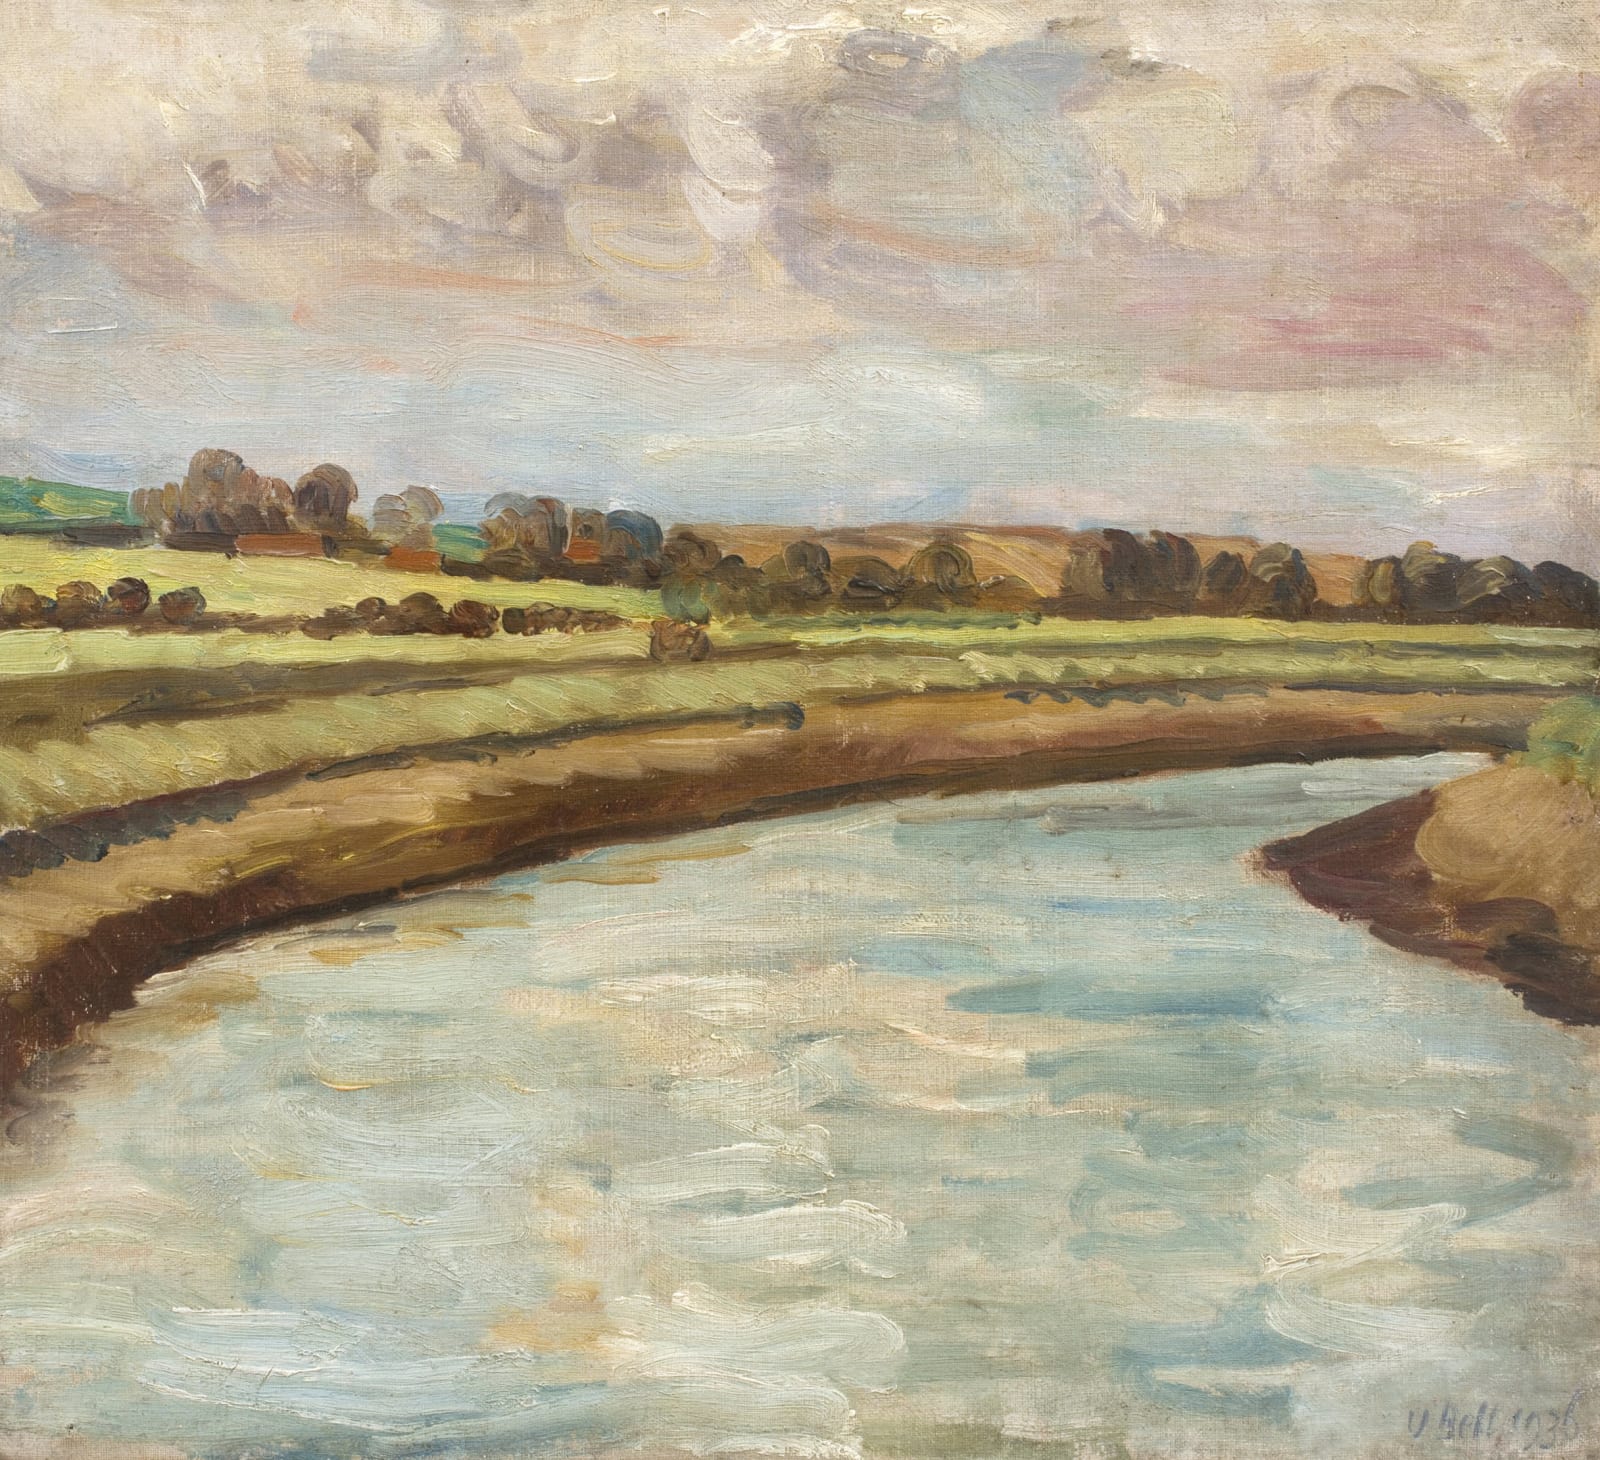 Vanessa Bell, The Ouse Near Piddinghoe, 1936